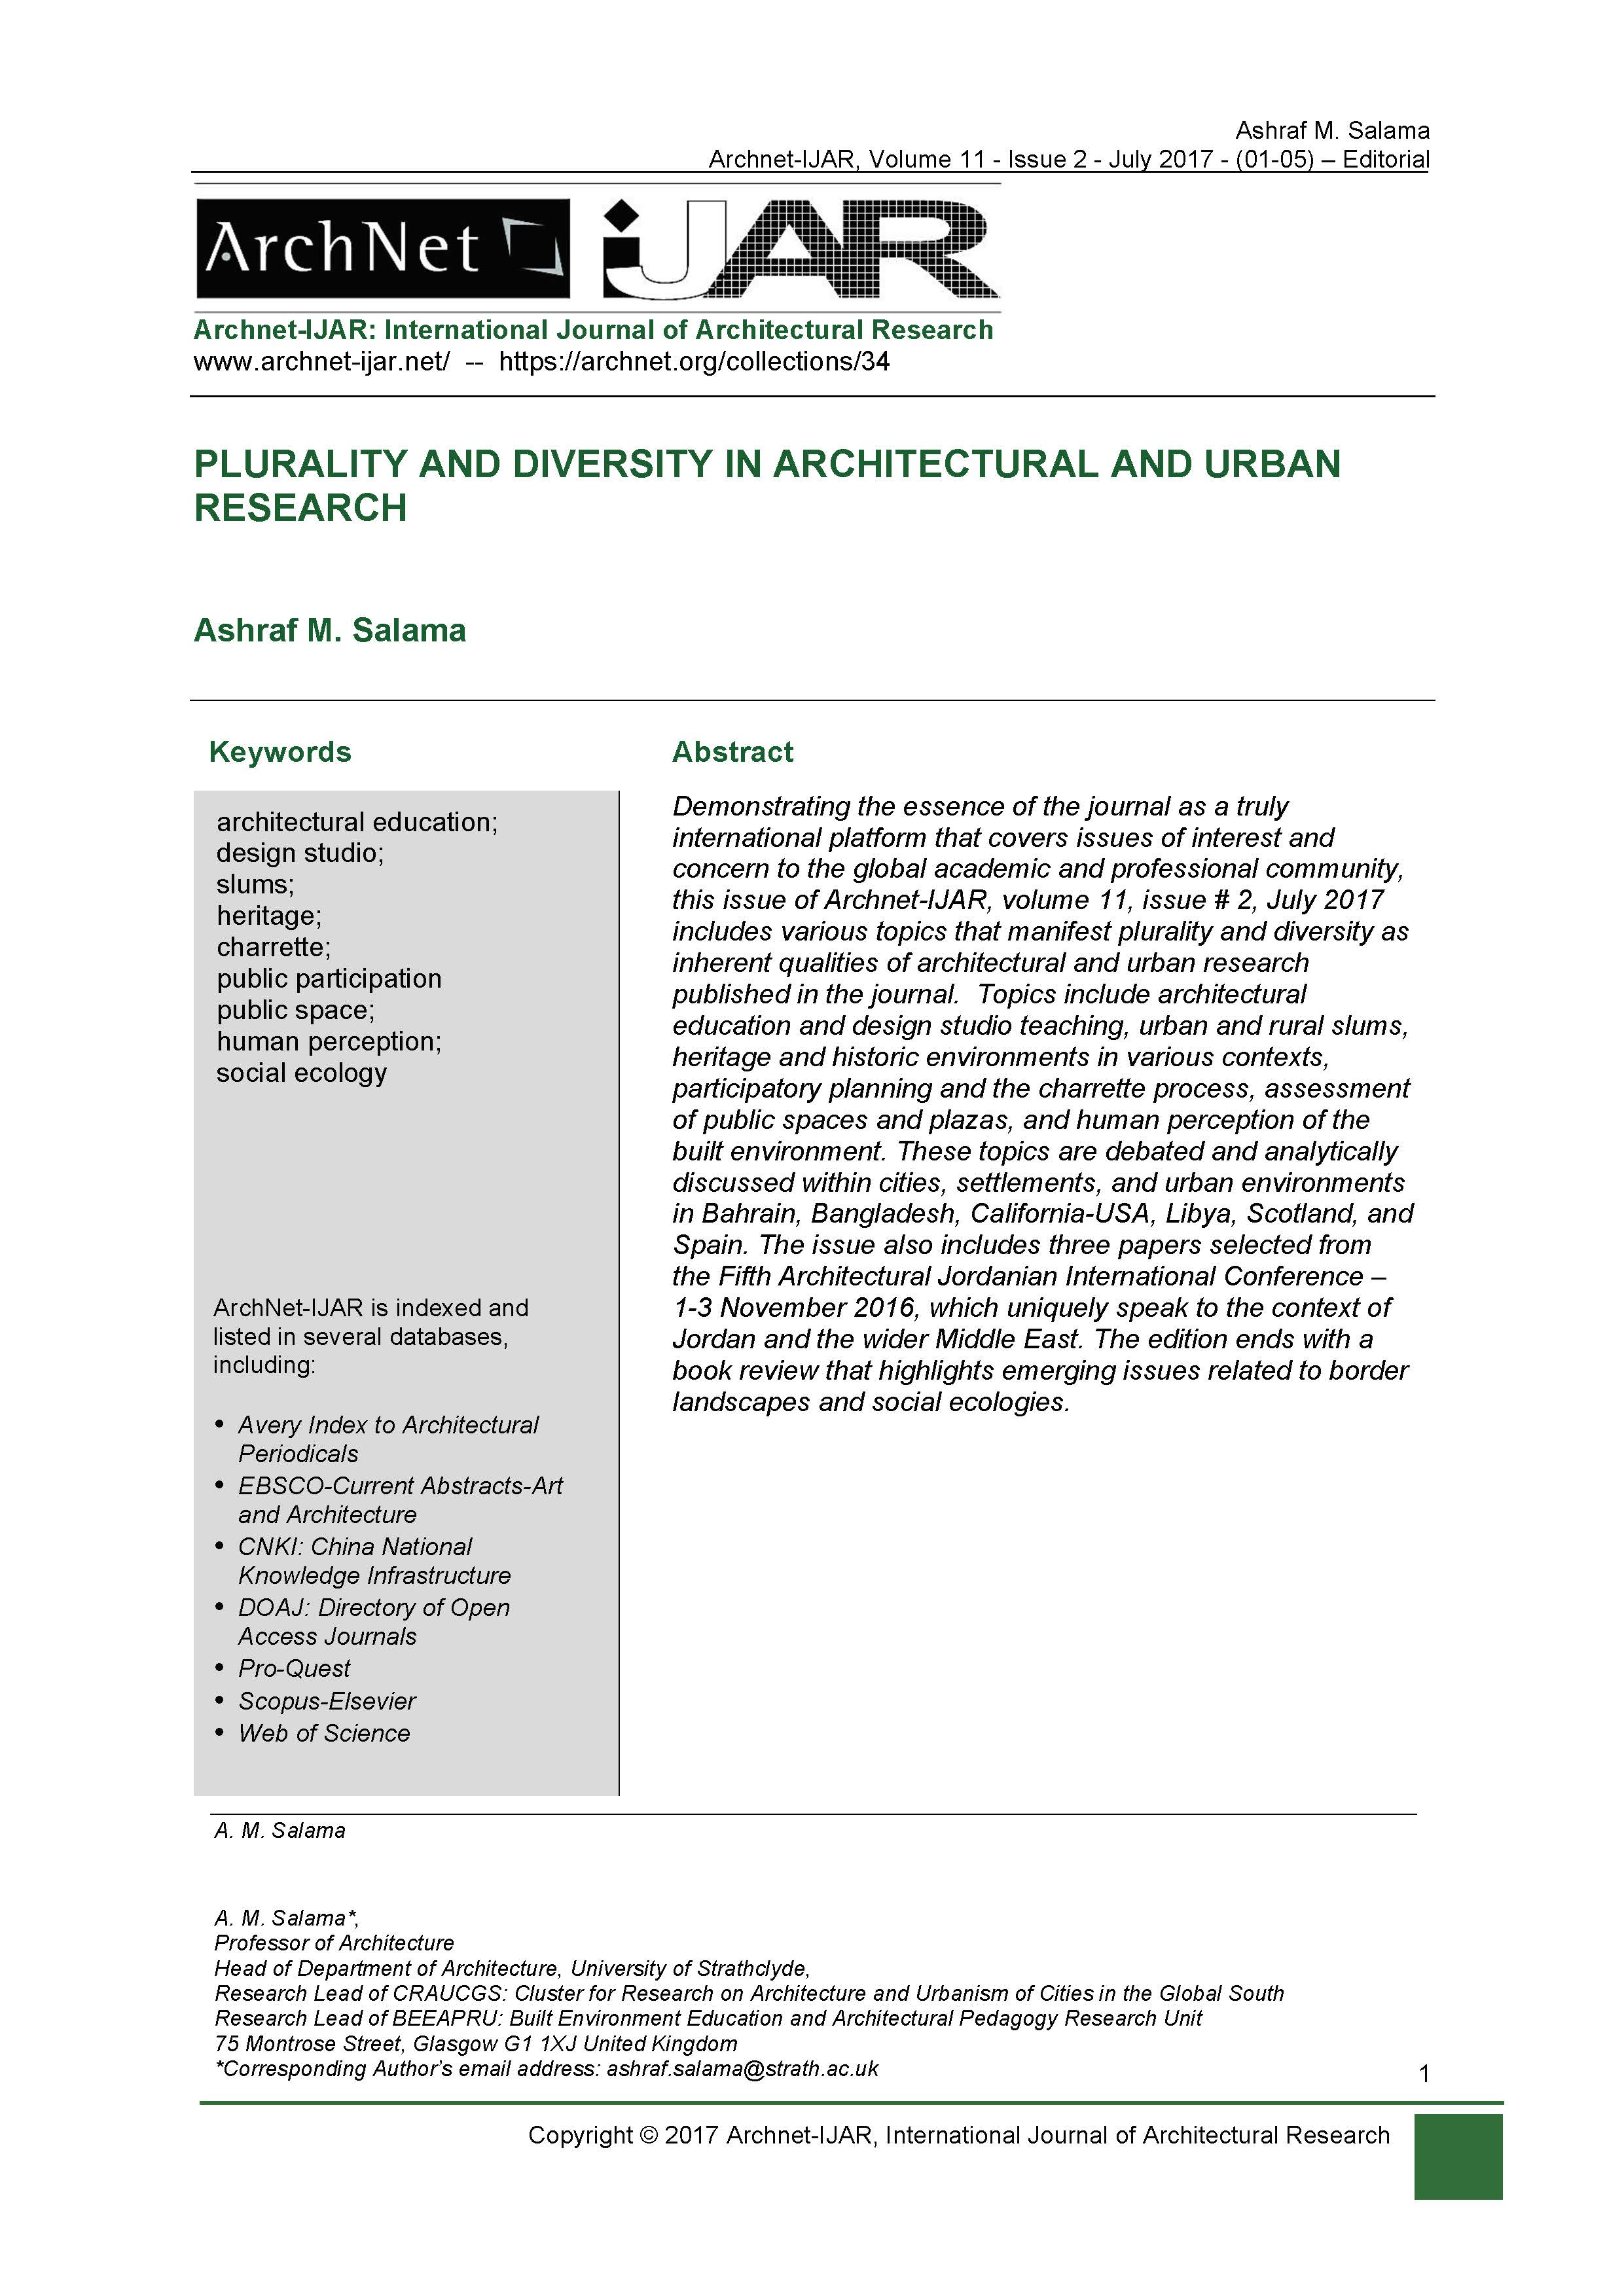 Ashraf Salama - <div style="text-align: justify;">Demonstrating the essence of the journal as a truly international platform that covers issues of interest and concern to the global academic and professional community, this issue of Archnet-IJAR, volume 11, issue # 2, July 2017 includes various topics that manifest plurality and diversity as inherent qualities of architectural and urban research published in the journal.&nbsp; Topics include architectural education and design studio teaching, urban and rural slums, heritage and historic environments in various contexts, participatory planning and the charrette process, assessment of public spaces and plazas, and human perception of the built environment. These topics are debated and analytically discussed within cities, settlements, and urban environments in Bahrain, Bangladesh, California-USA, Libya, Scotland, and Spain. The issue also includes three papers selected from the Fifth Architectural Jordanian International Conference – 1-3 November 2016, which uniquely speak to the context of Jordan and the wider Middle East. The edition ends with a book review that highlights emerging issues related to border landscapes and social ecologies.</div>